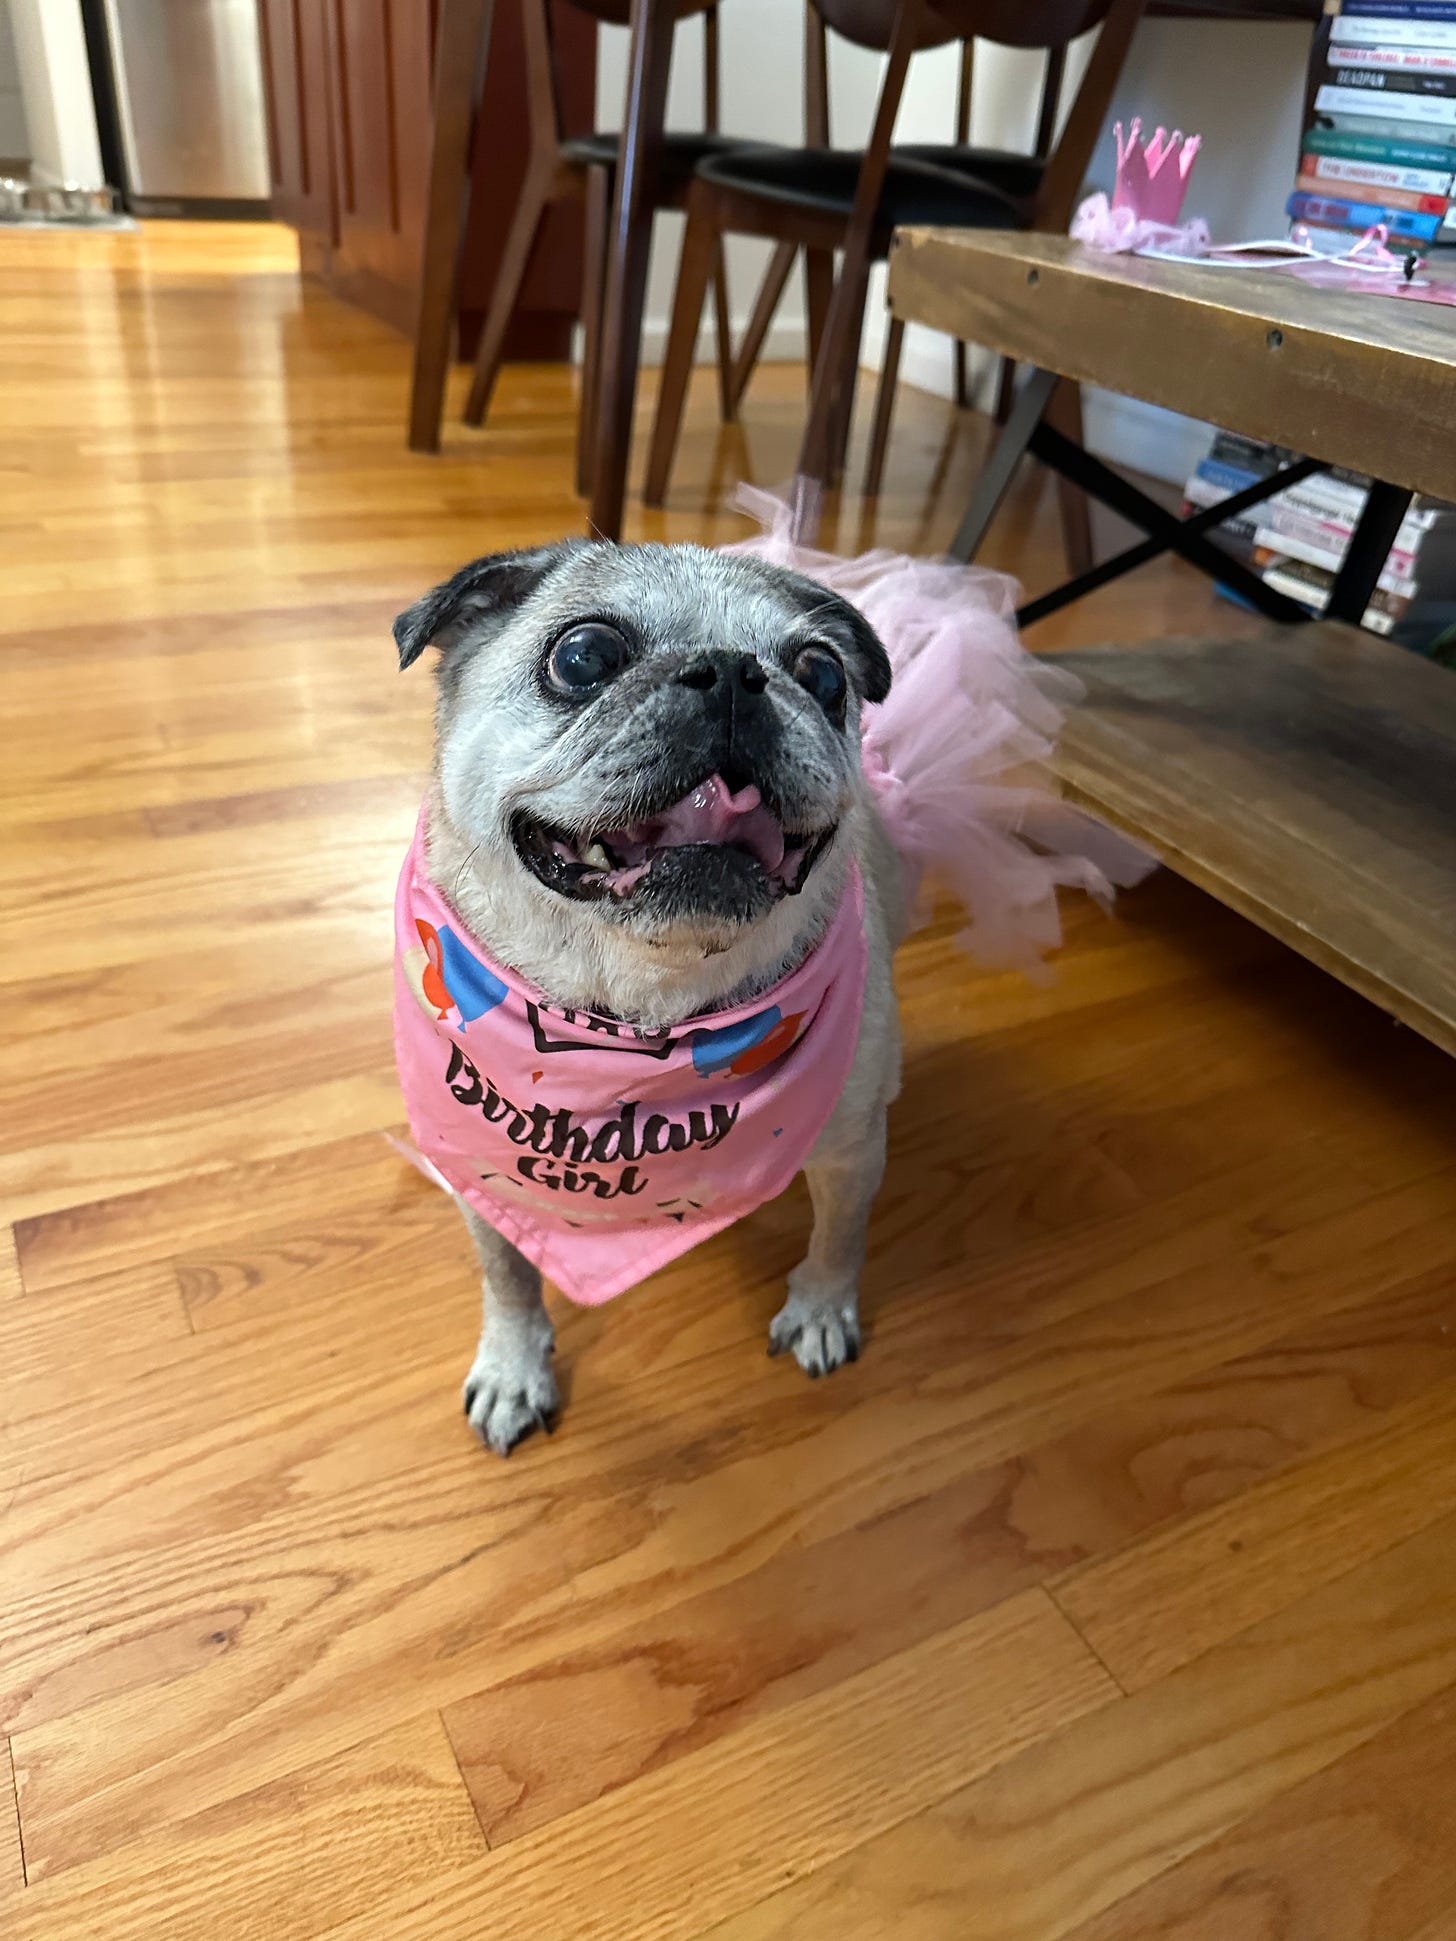 A pug overdressed in birthday regalia that she does not quite understand.